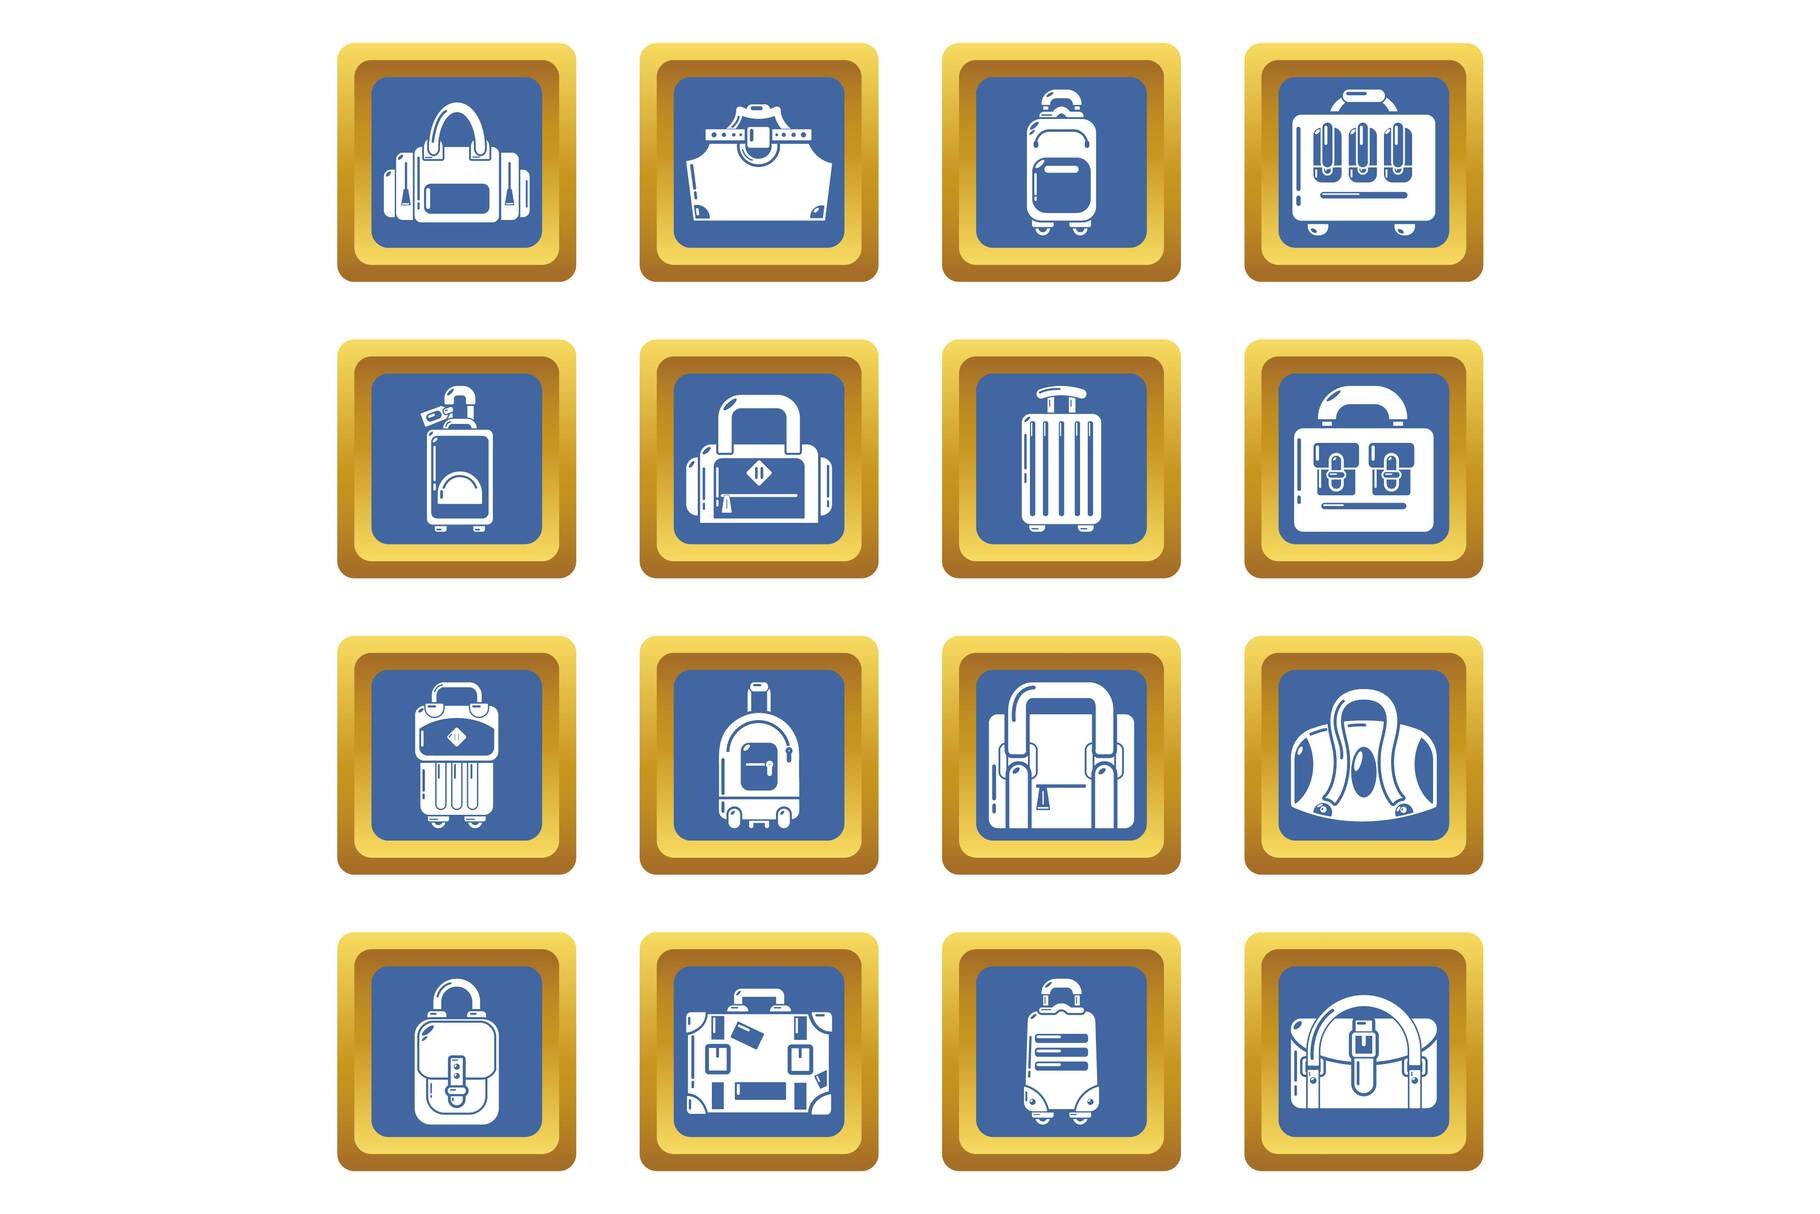 Bag baggage suitcase icons set blue cover image.